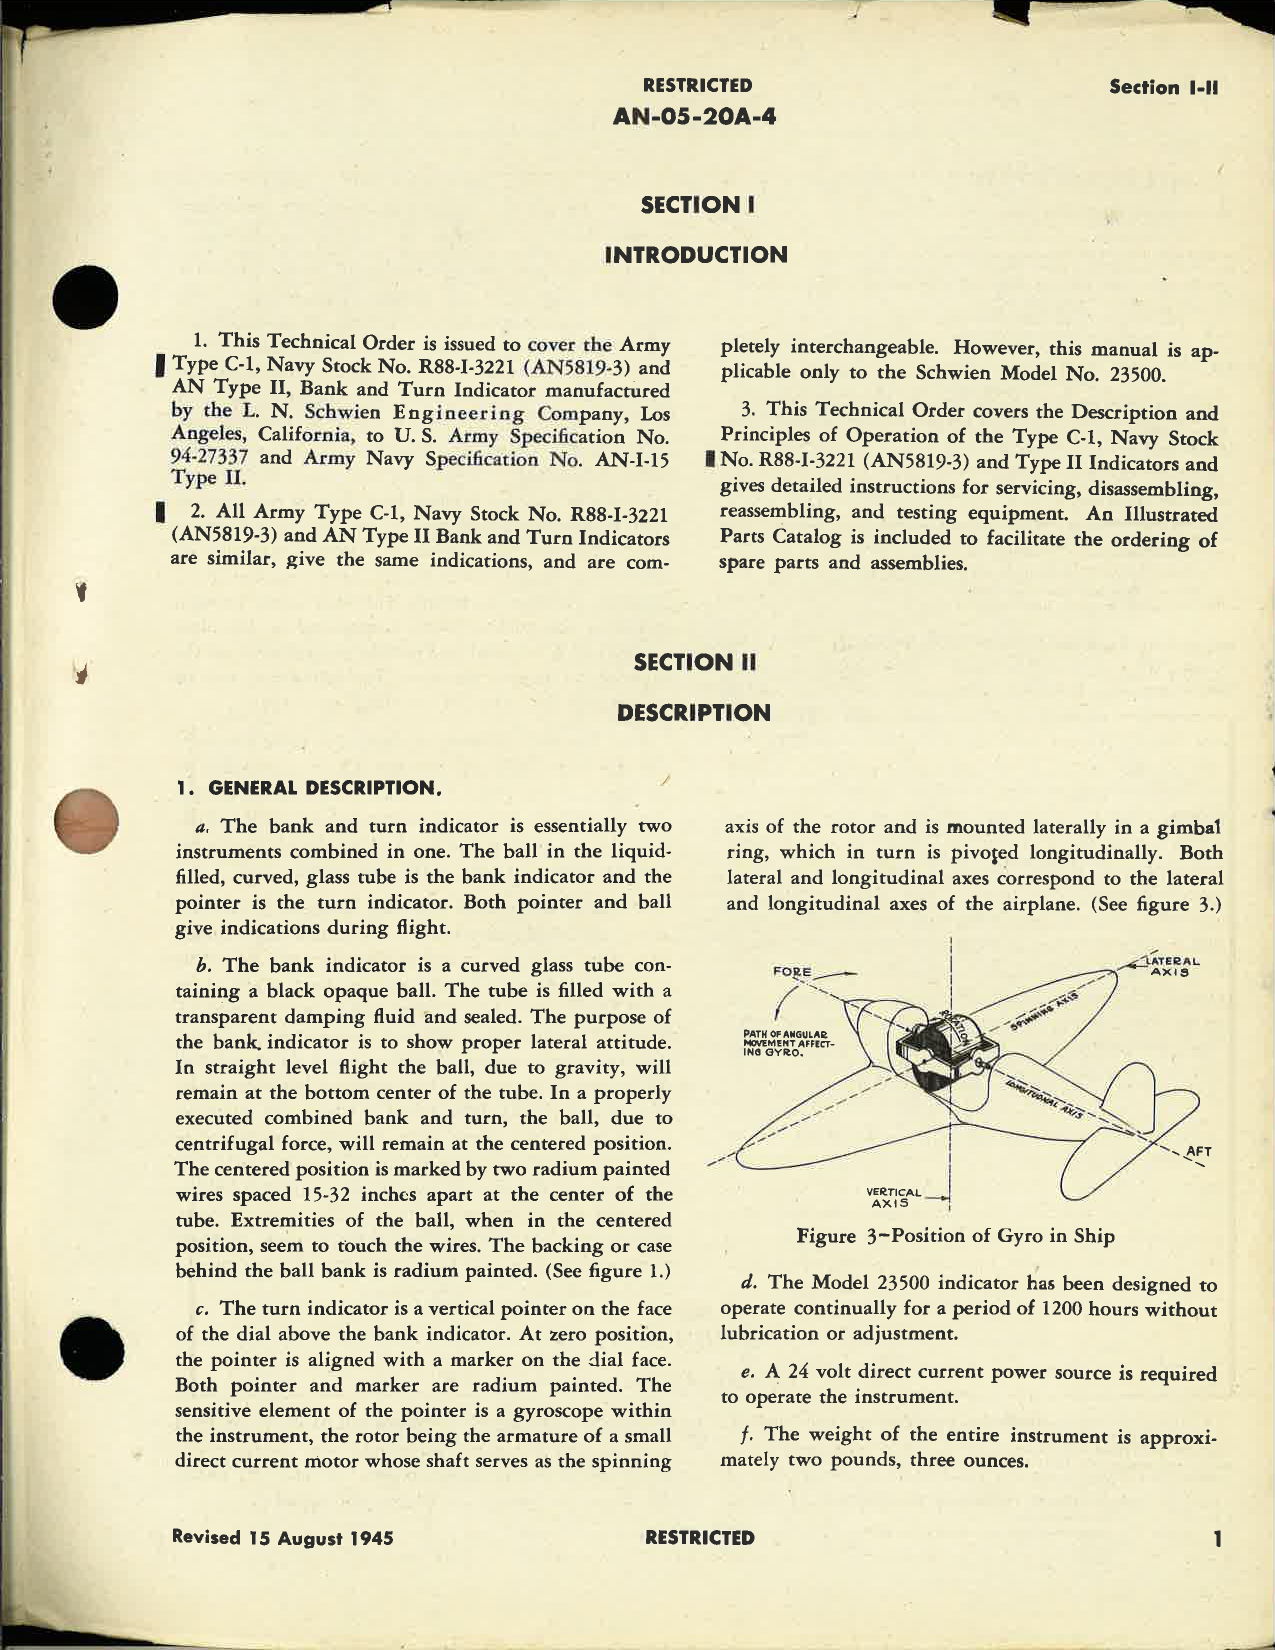 Sample page 5 from AirCorps Library document: Operation, Service, & Overhaul Instructions w/ Parts Catalog for New Style Bank and Turn Indicator